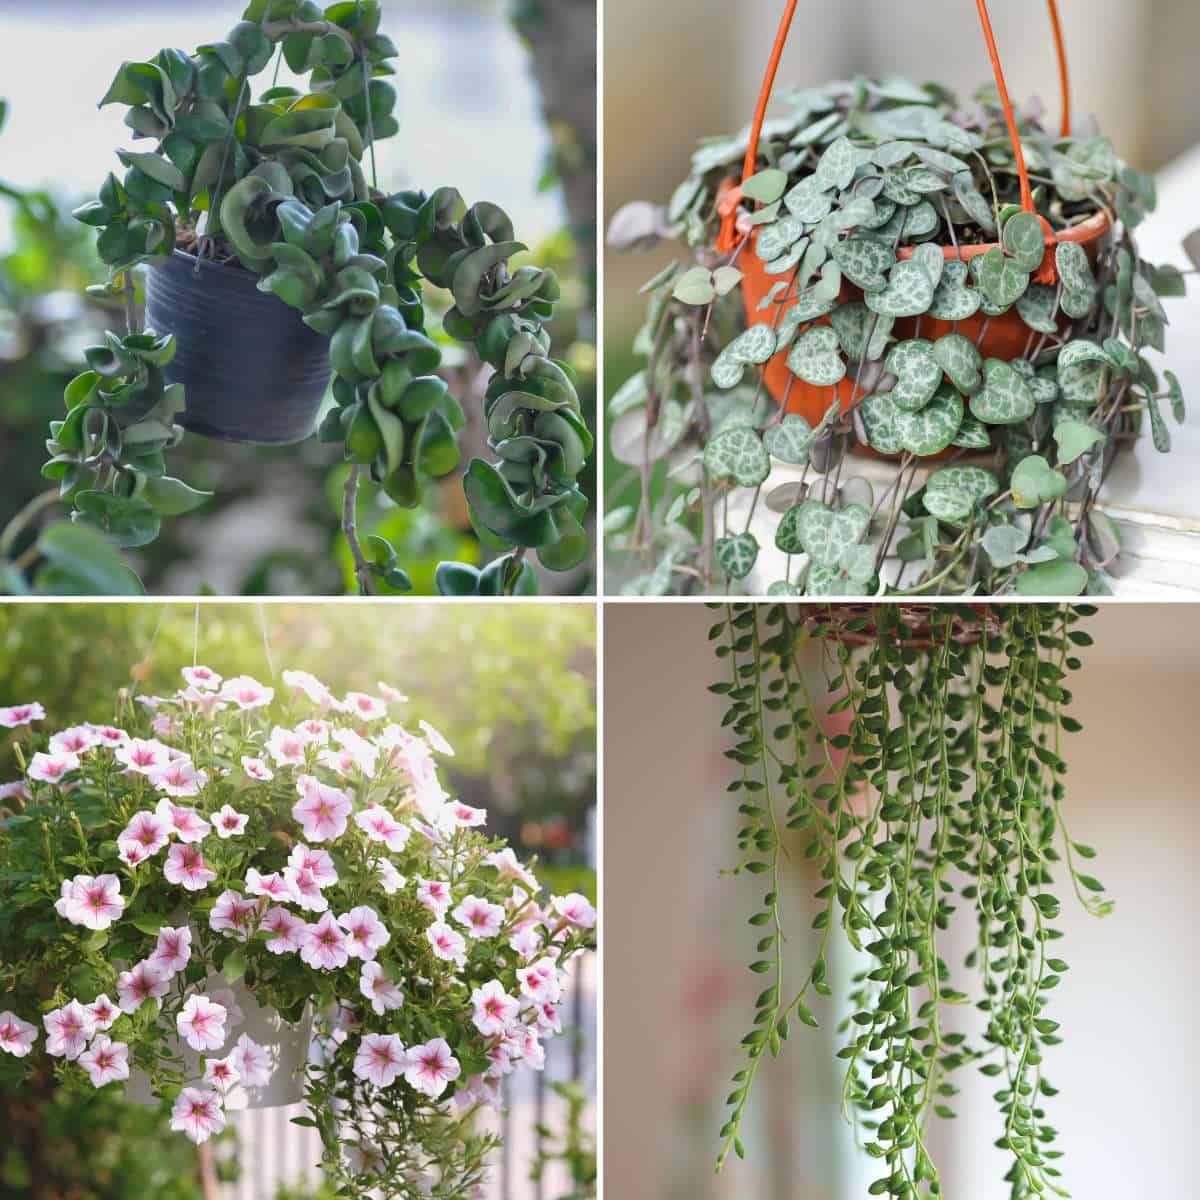 25 Best Plants for Hanging Planters (Indoors or Outdoors)